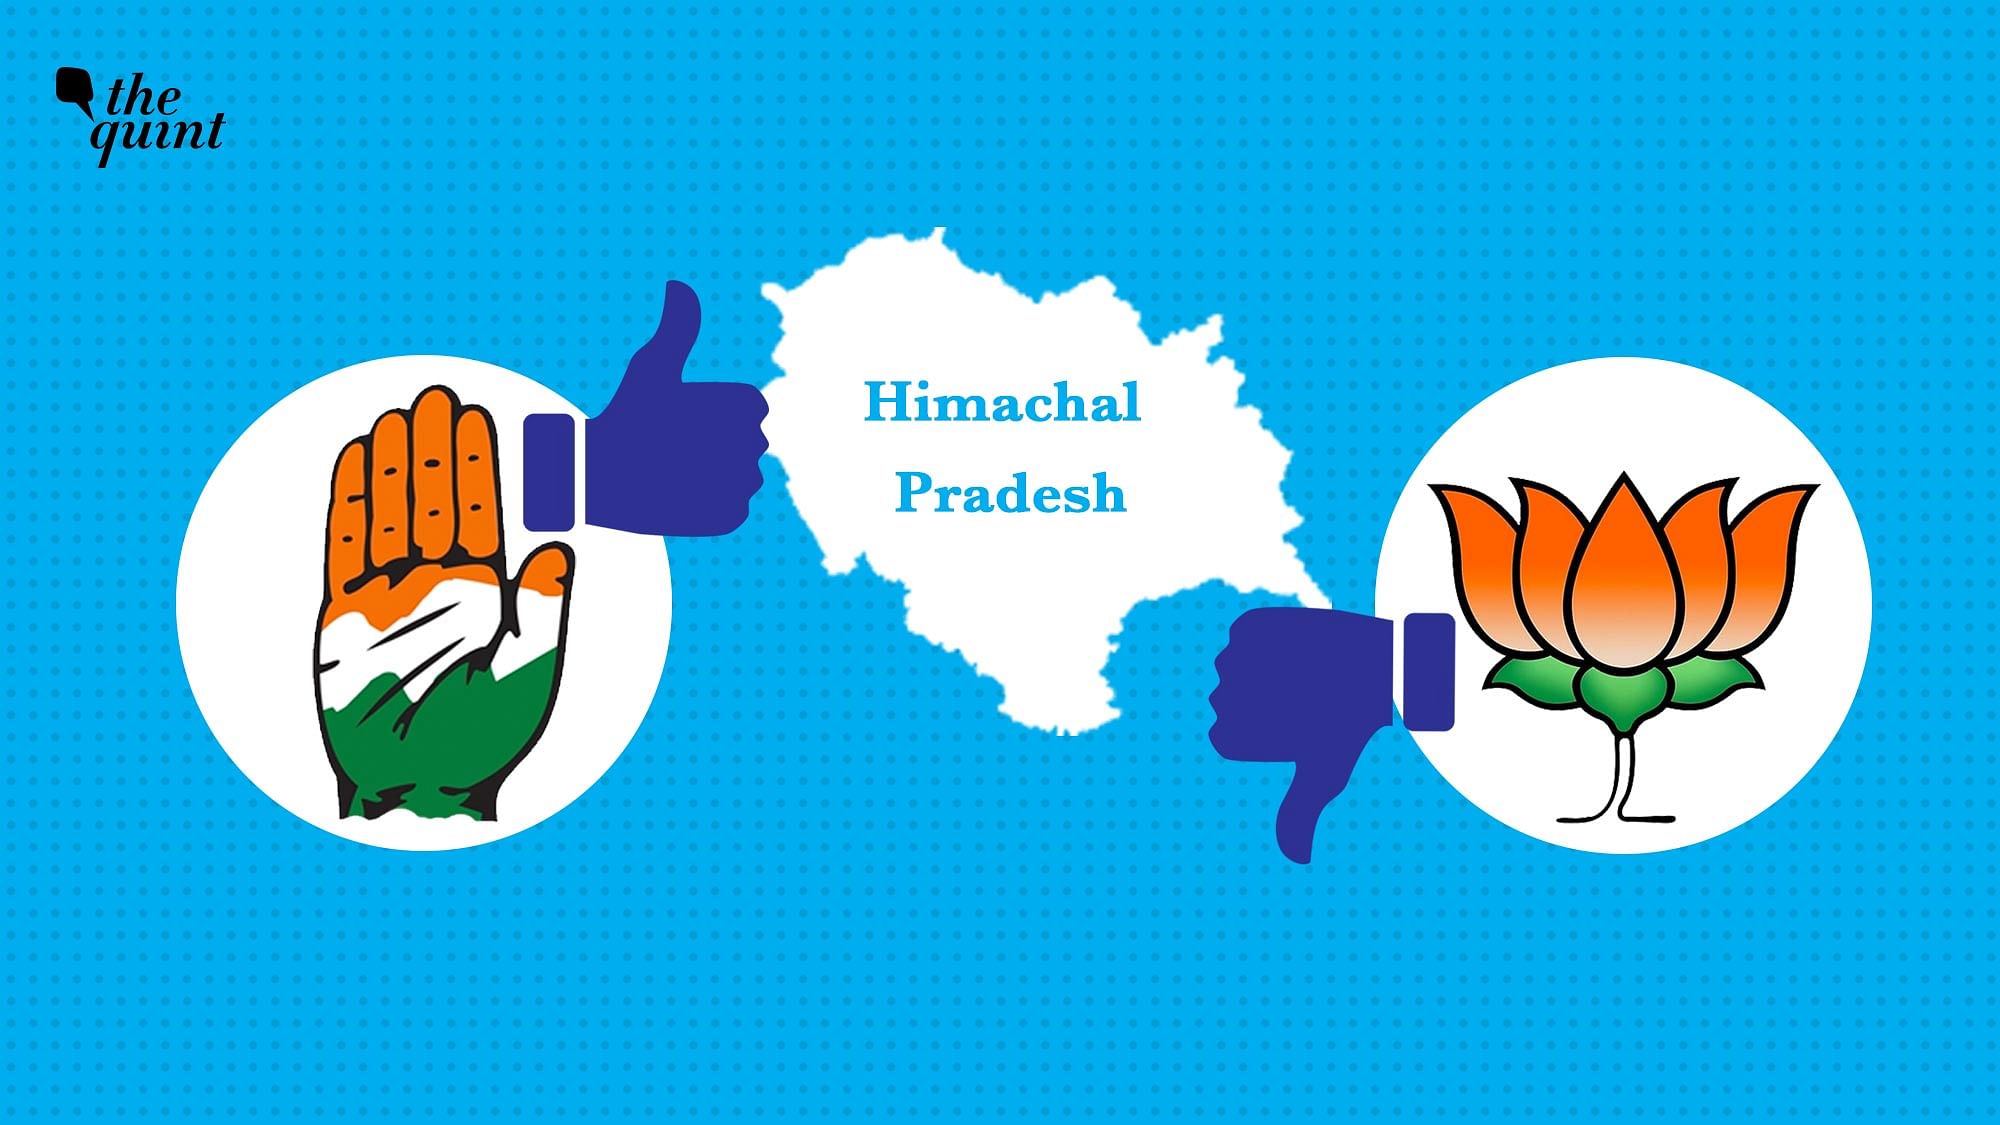 <div class="paragraphs"><p>The Congress handed a 4:0 rout to the BJP in the Himachal Pradesh bypolls.</p></div>